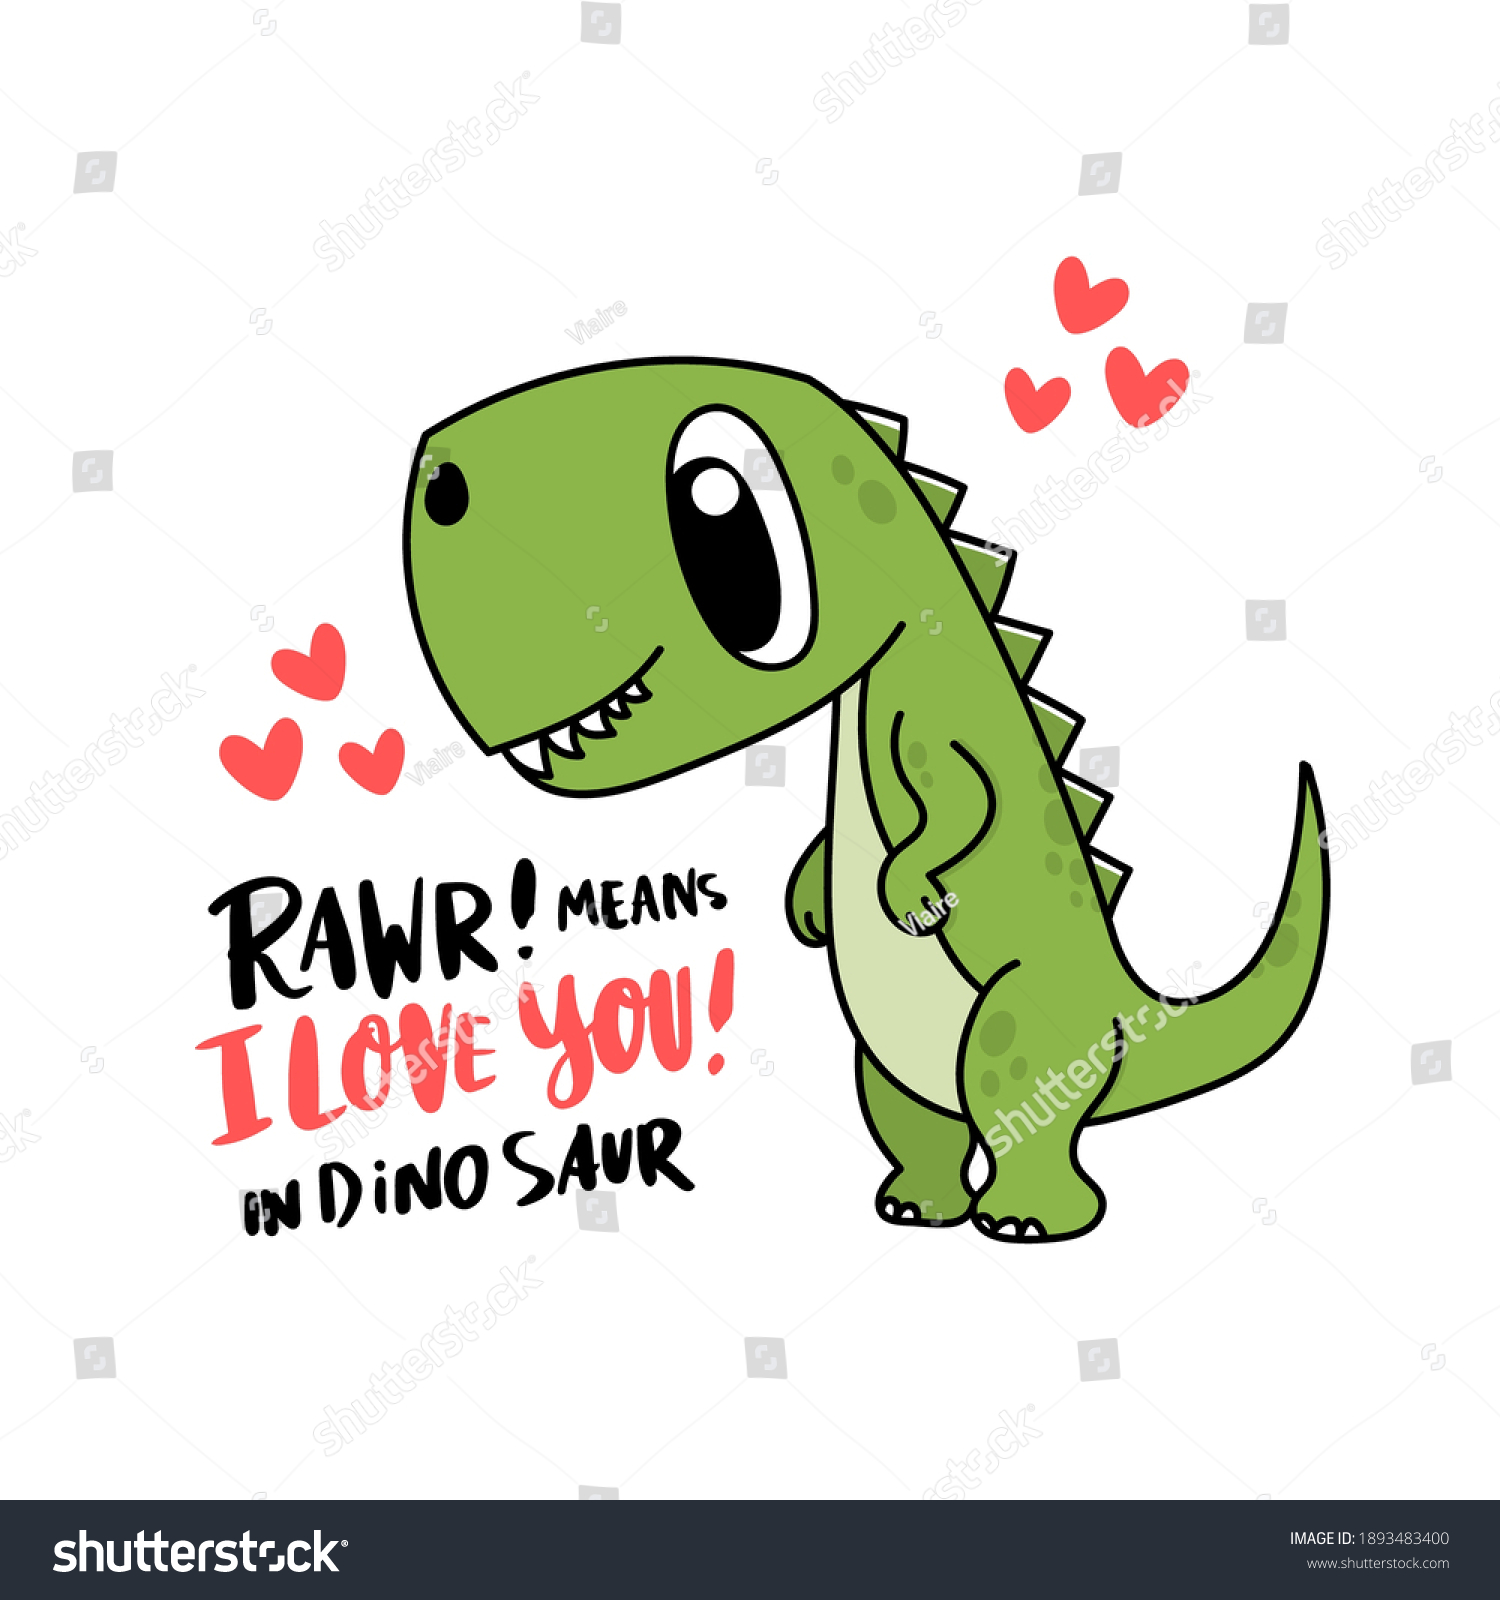 SVG of Funny character dinosaur or Tyrannosaurus. Cute T-Rex. Adorable jurassic reptile. The inscription: Rawr! means I love you! Colored vector illustration for Valentine's day. svg